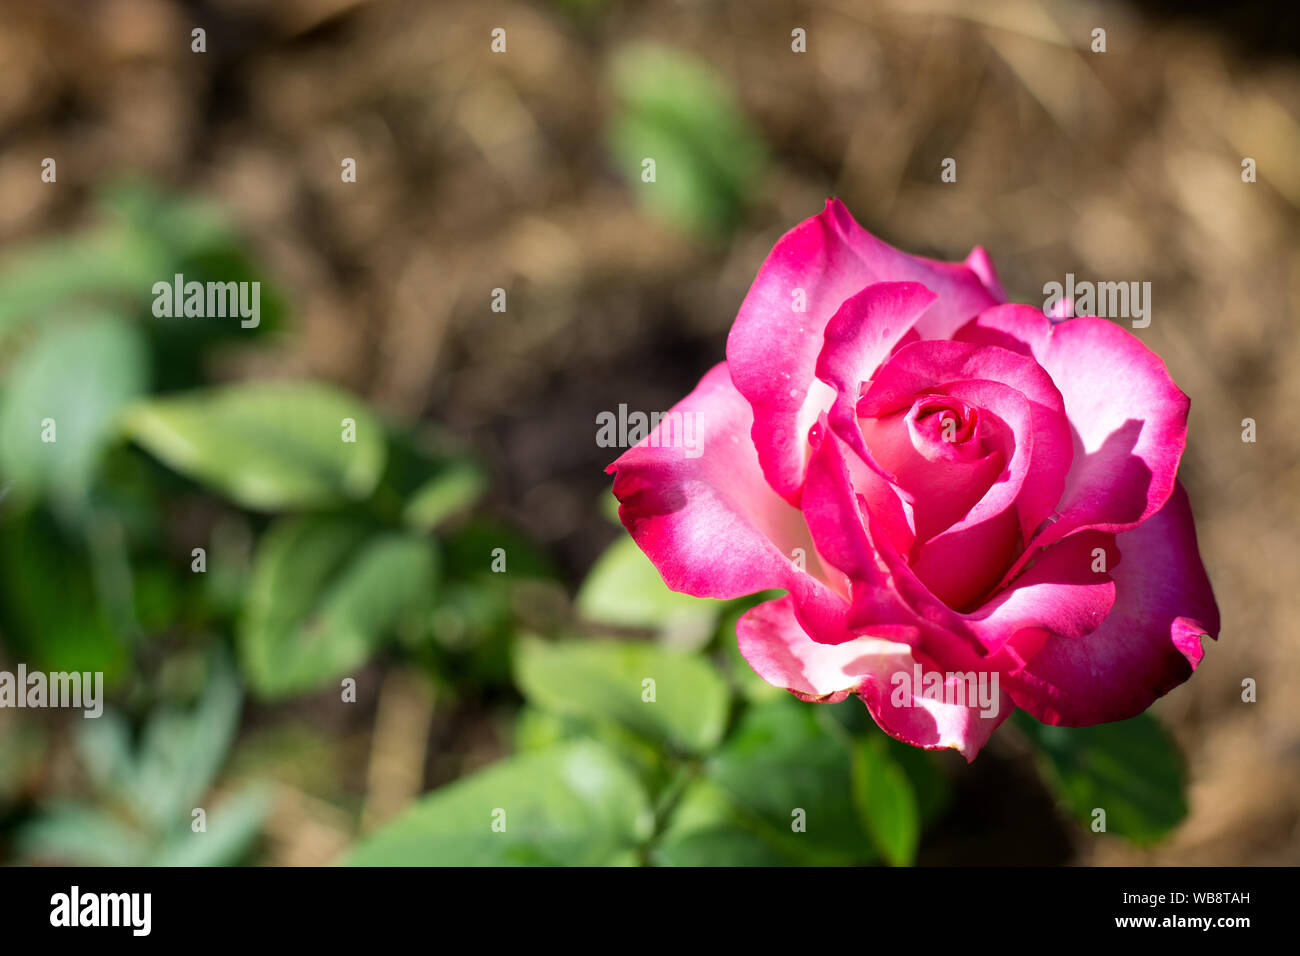 Pink rose flower, red bud on a green foliage background, isolated flower, photo Stock Photo